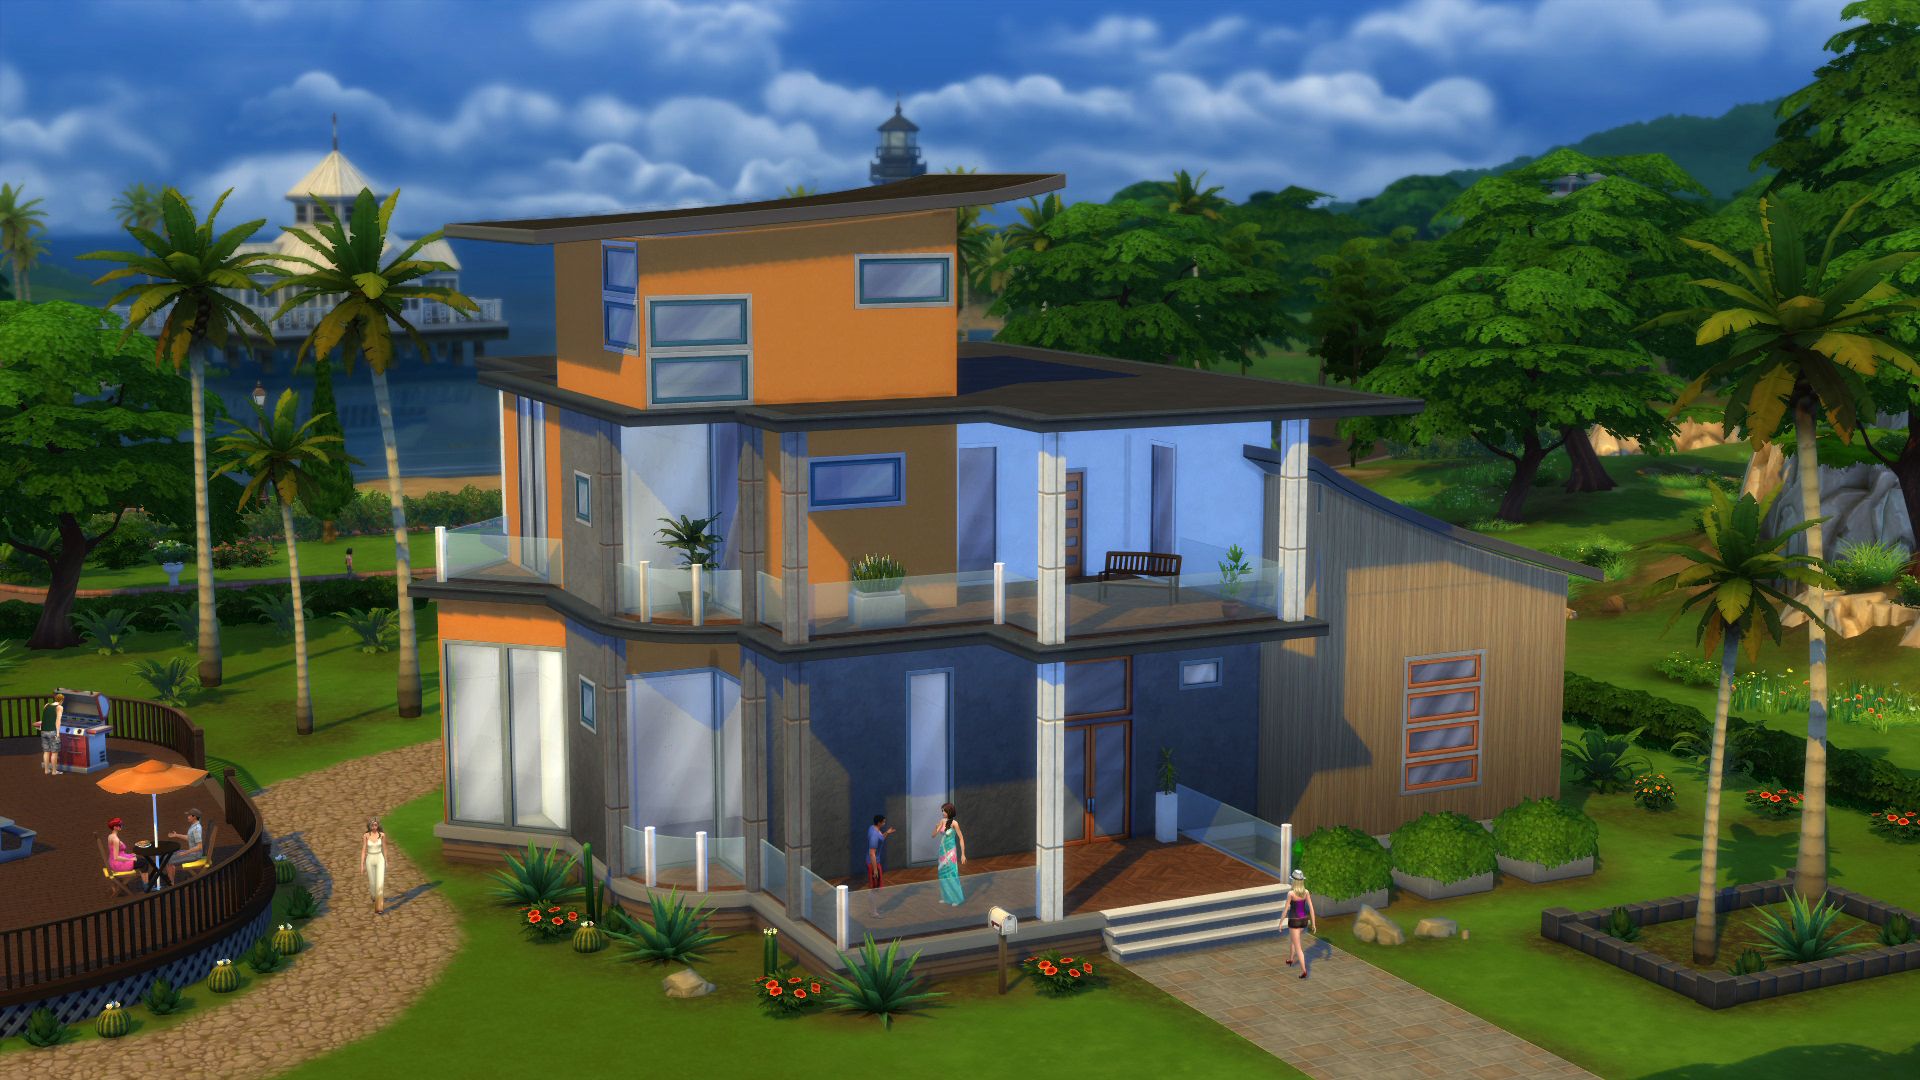 Sims 4: The Sims in Bloom Challenge goals and rules